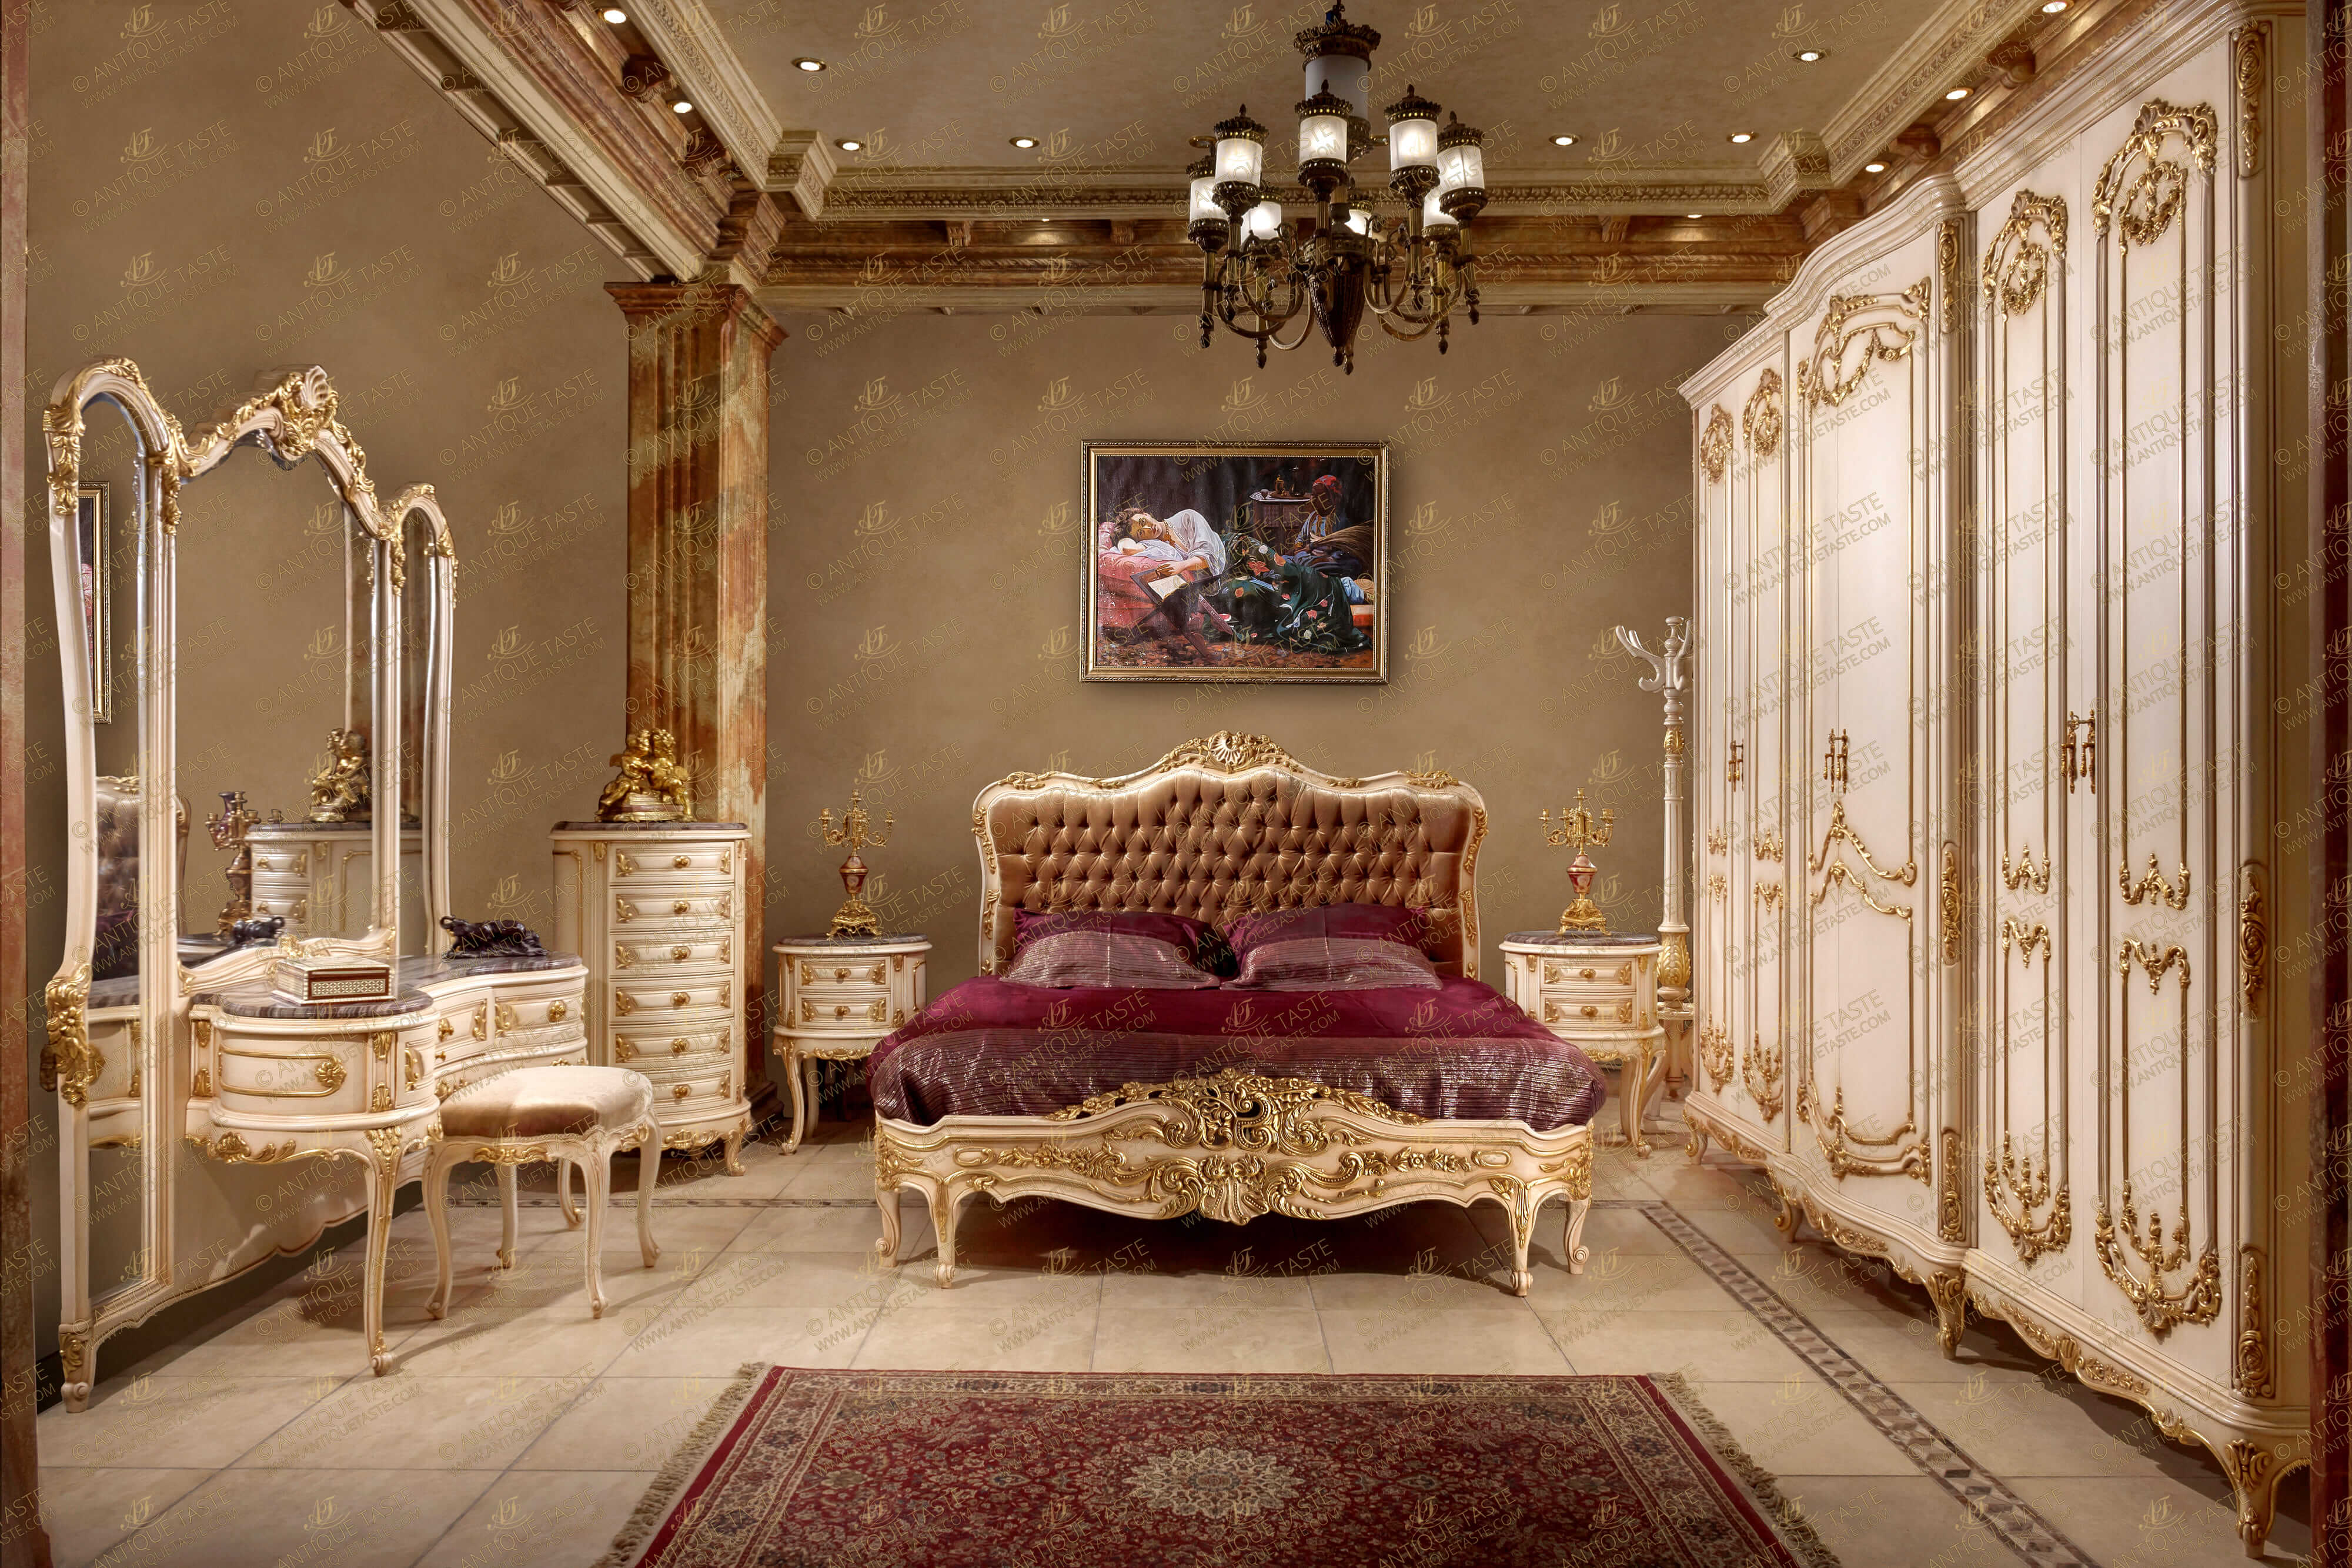 What are Louis XIV, XV and XVI in Interior Design?